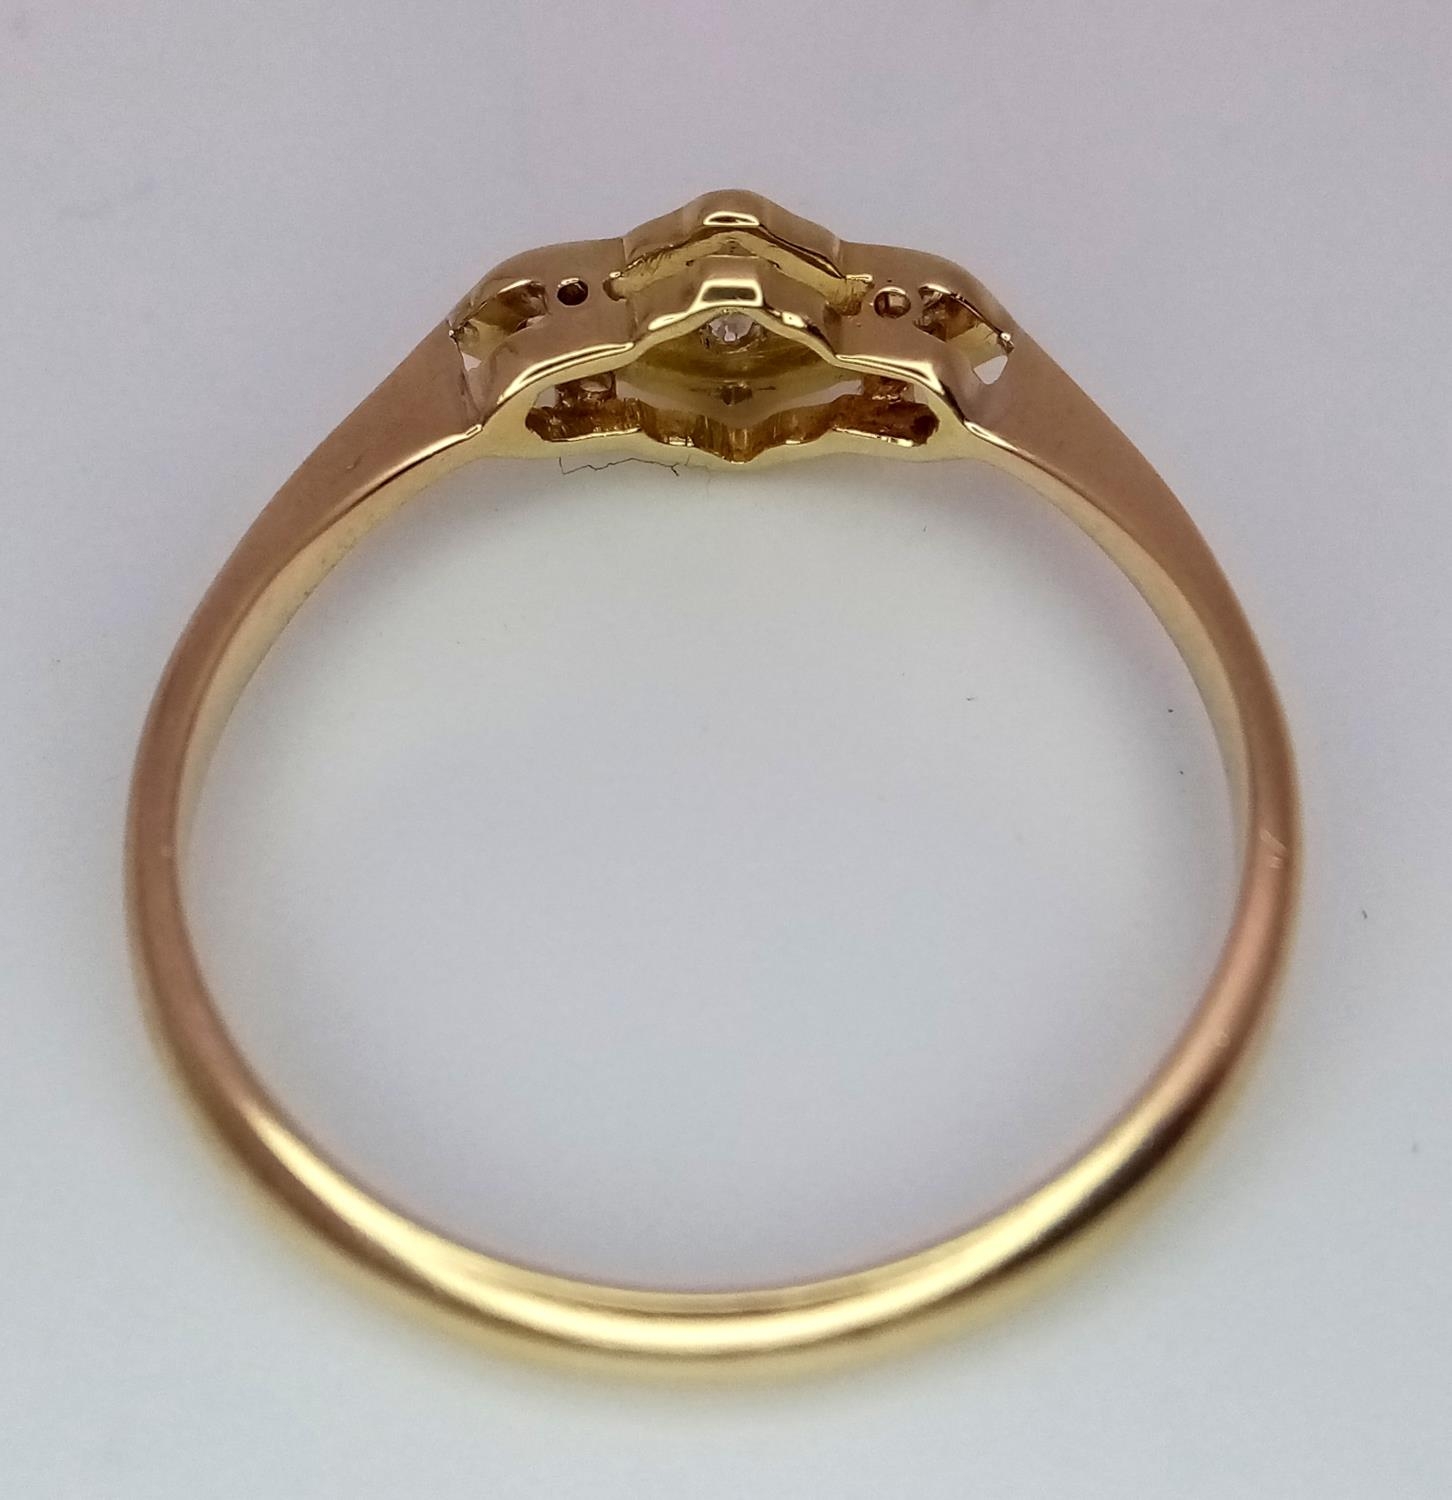 AN 18K YELLOW GOLD & PLATINUM VINTAGE DIAMOND RING. Size O, 2.2g total weight. Ref: SC 9042 - Image 3 of 4